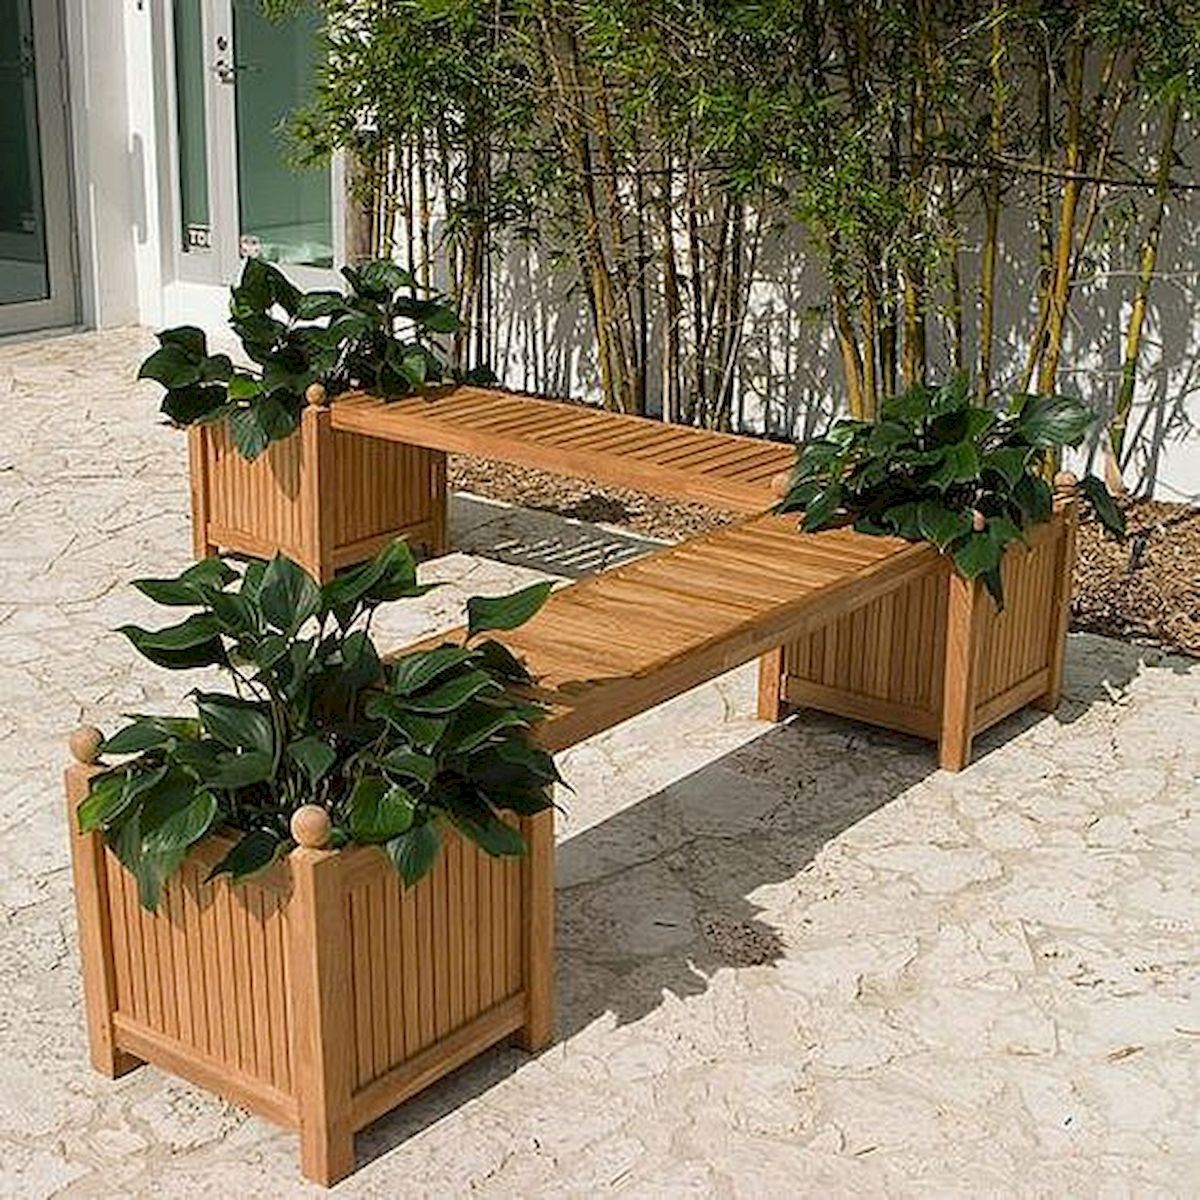 Recycled Teak Outdoor Furniture